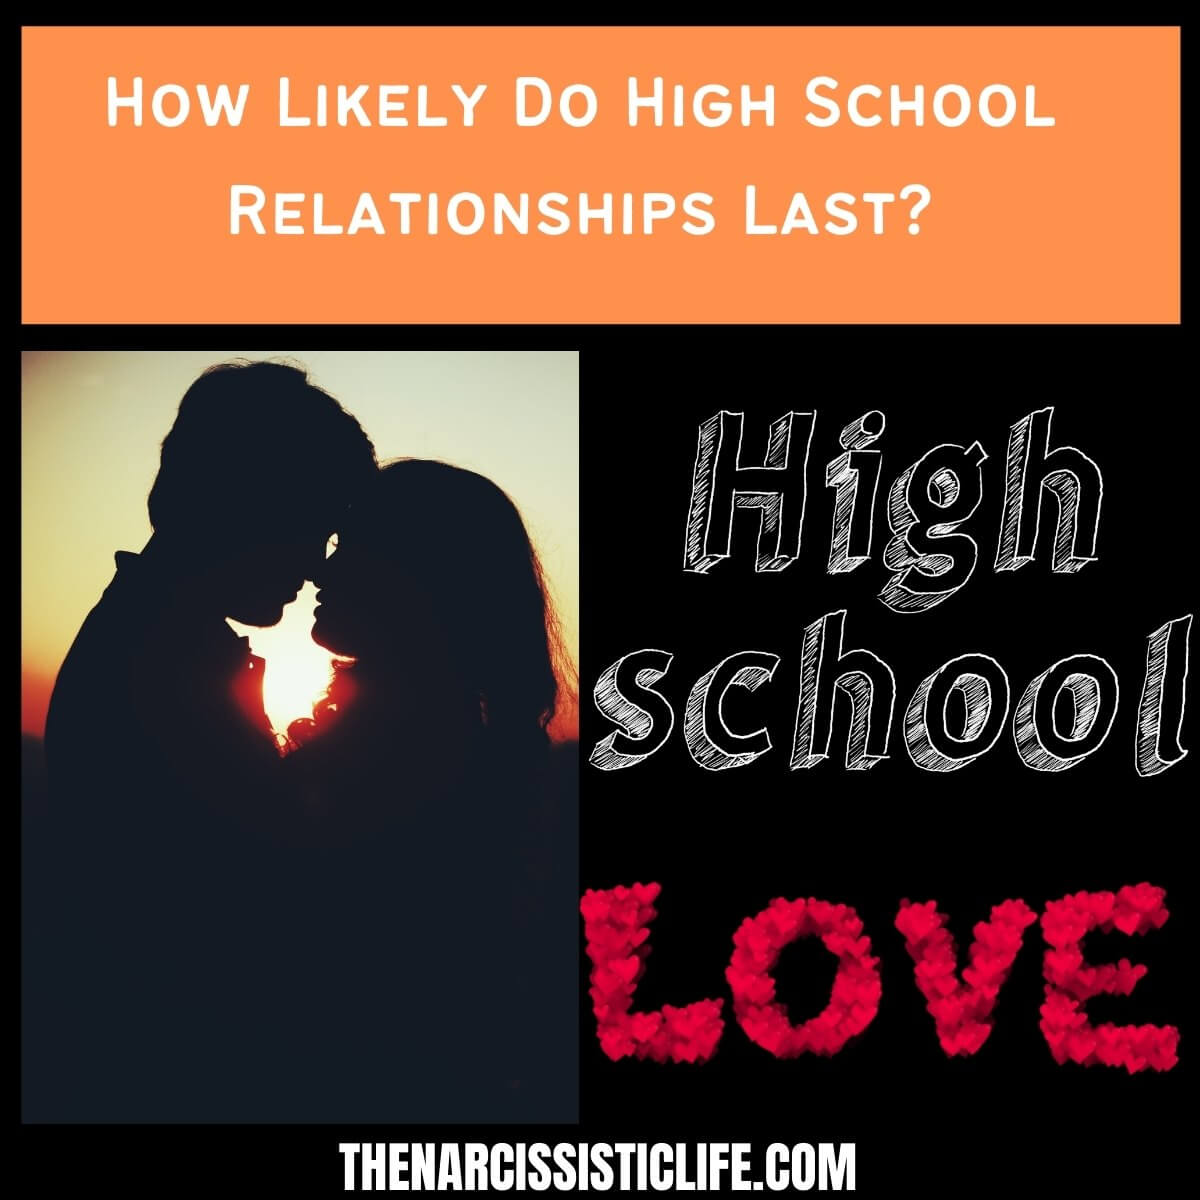 How Likely Do High School Relationships Last